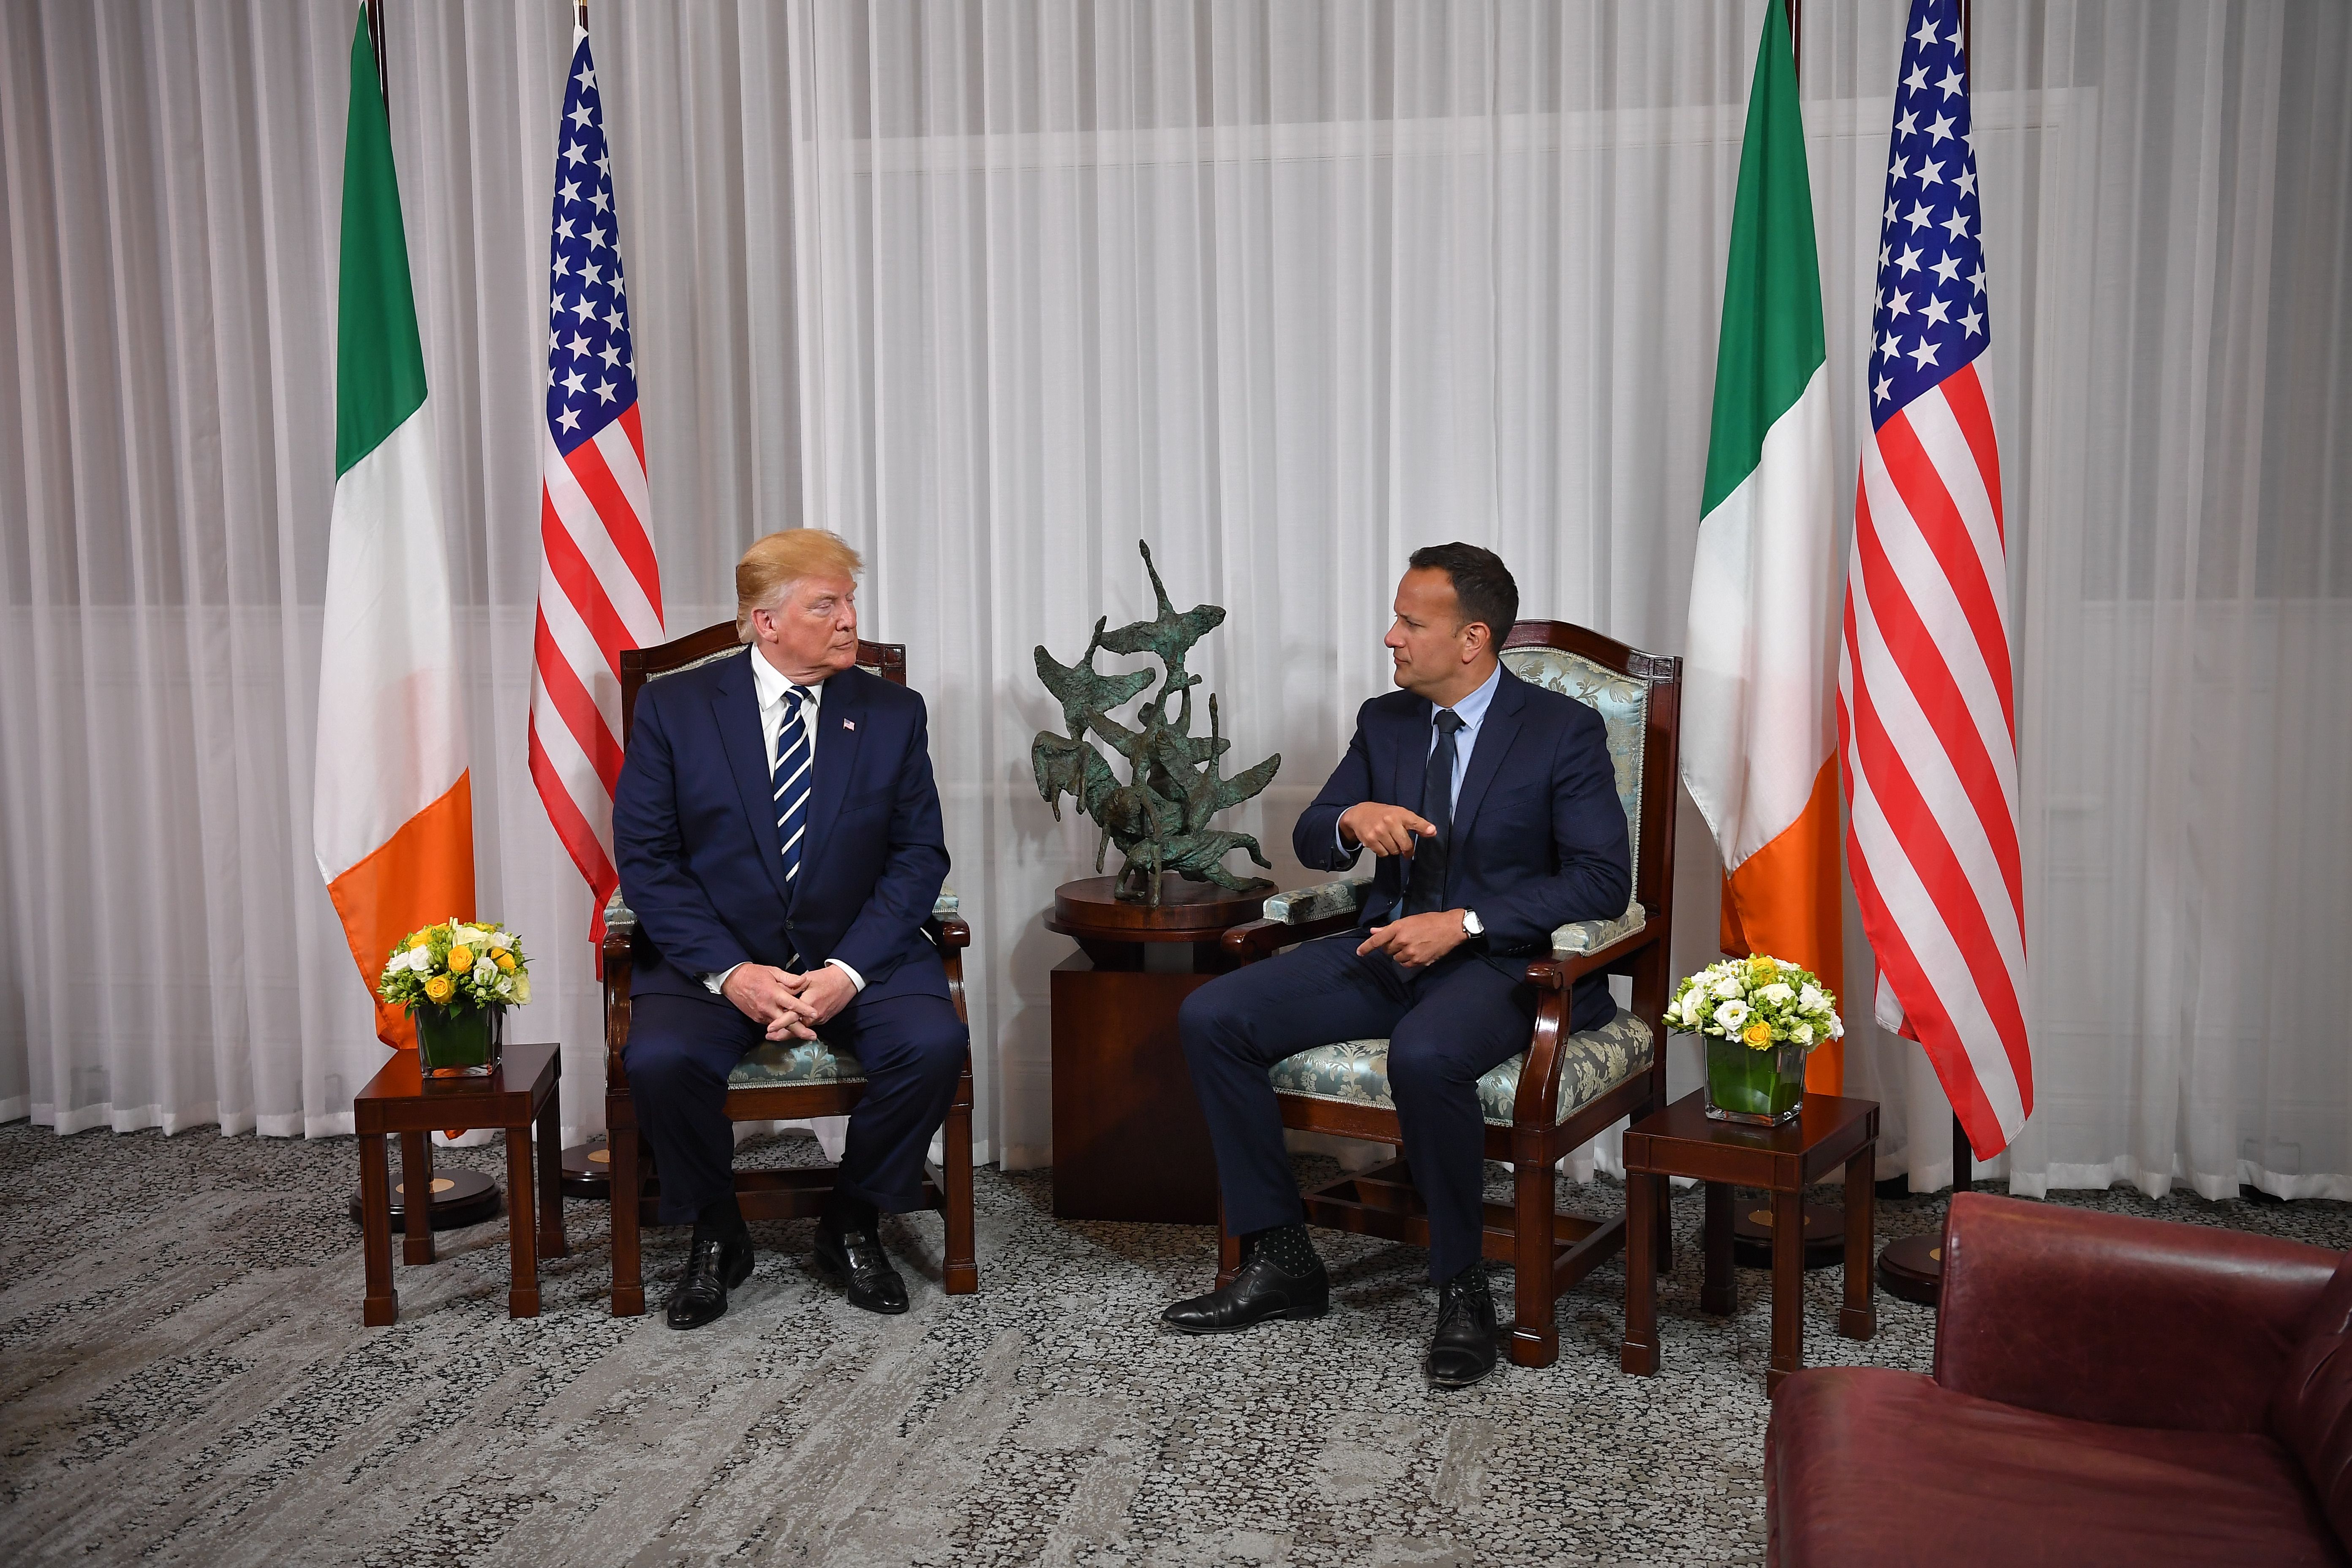 President Trump (L) meets with Irish Prime Minister Leo Varadkar (R) at Shannon Airport in Shannon, Ireland on June 5, 2019. 